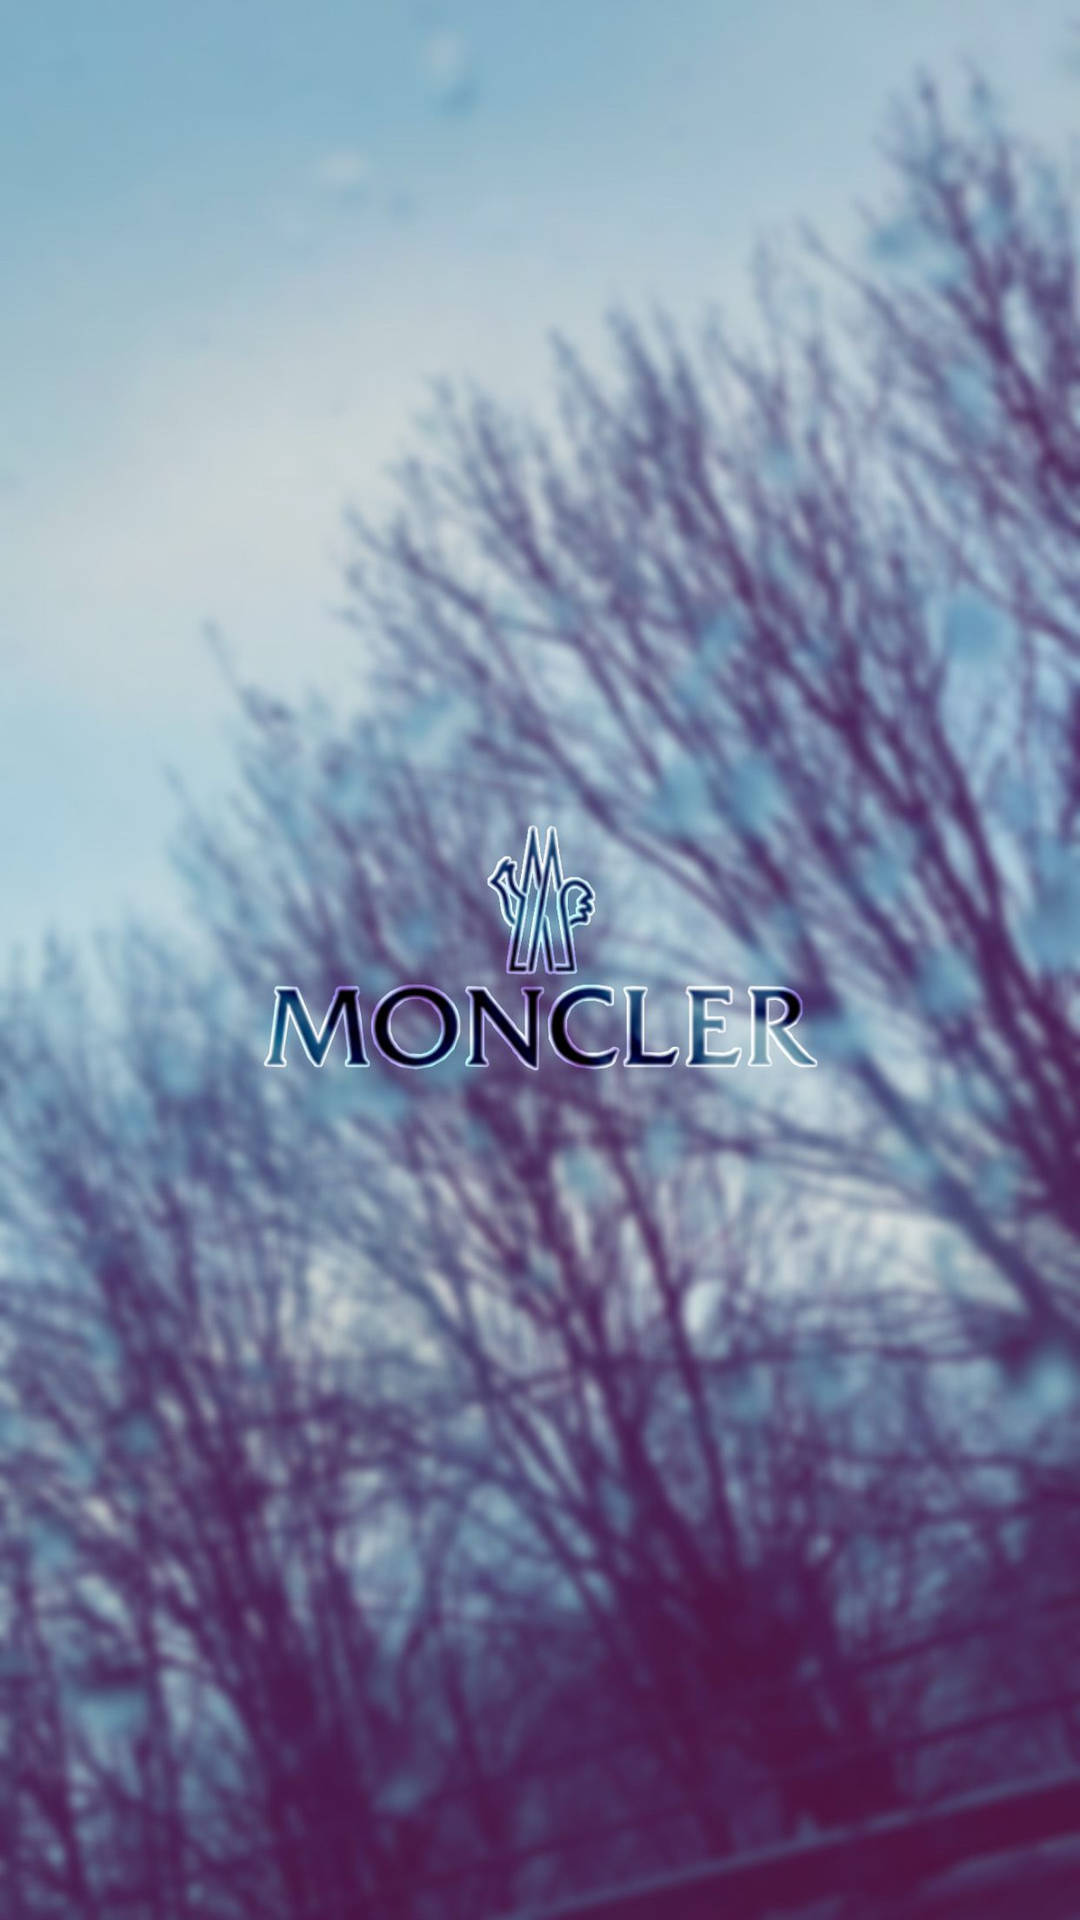 Top 999+ Moncler Wallpapers Full HD, 4K✅Free to Use